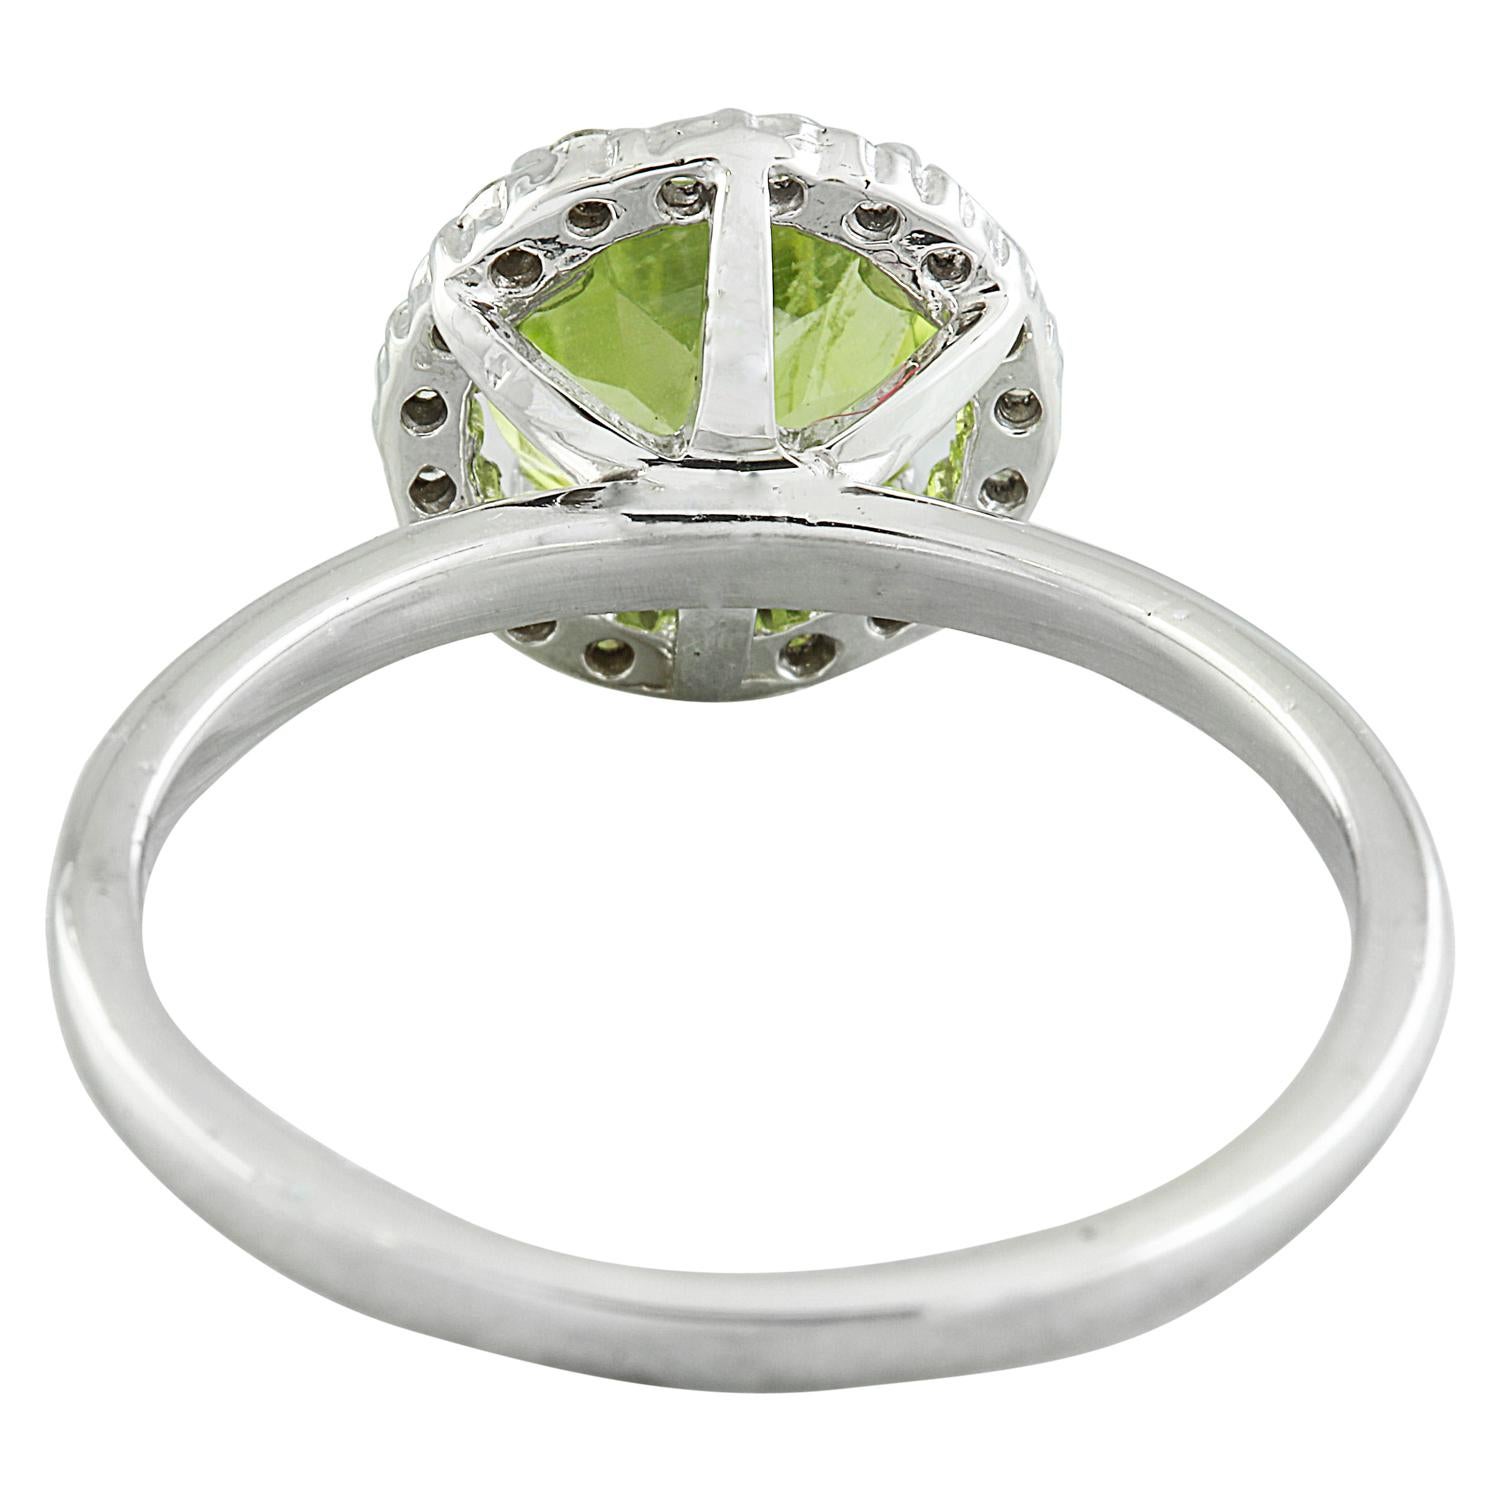 Exquisite Natural Peridot Diamond Ring In 14 Karat White Gold  In New Condition For Sale In Manhattan Beach, CA